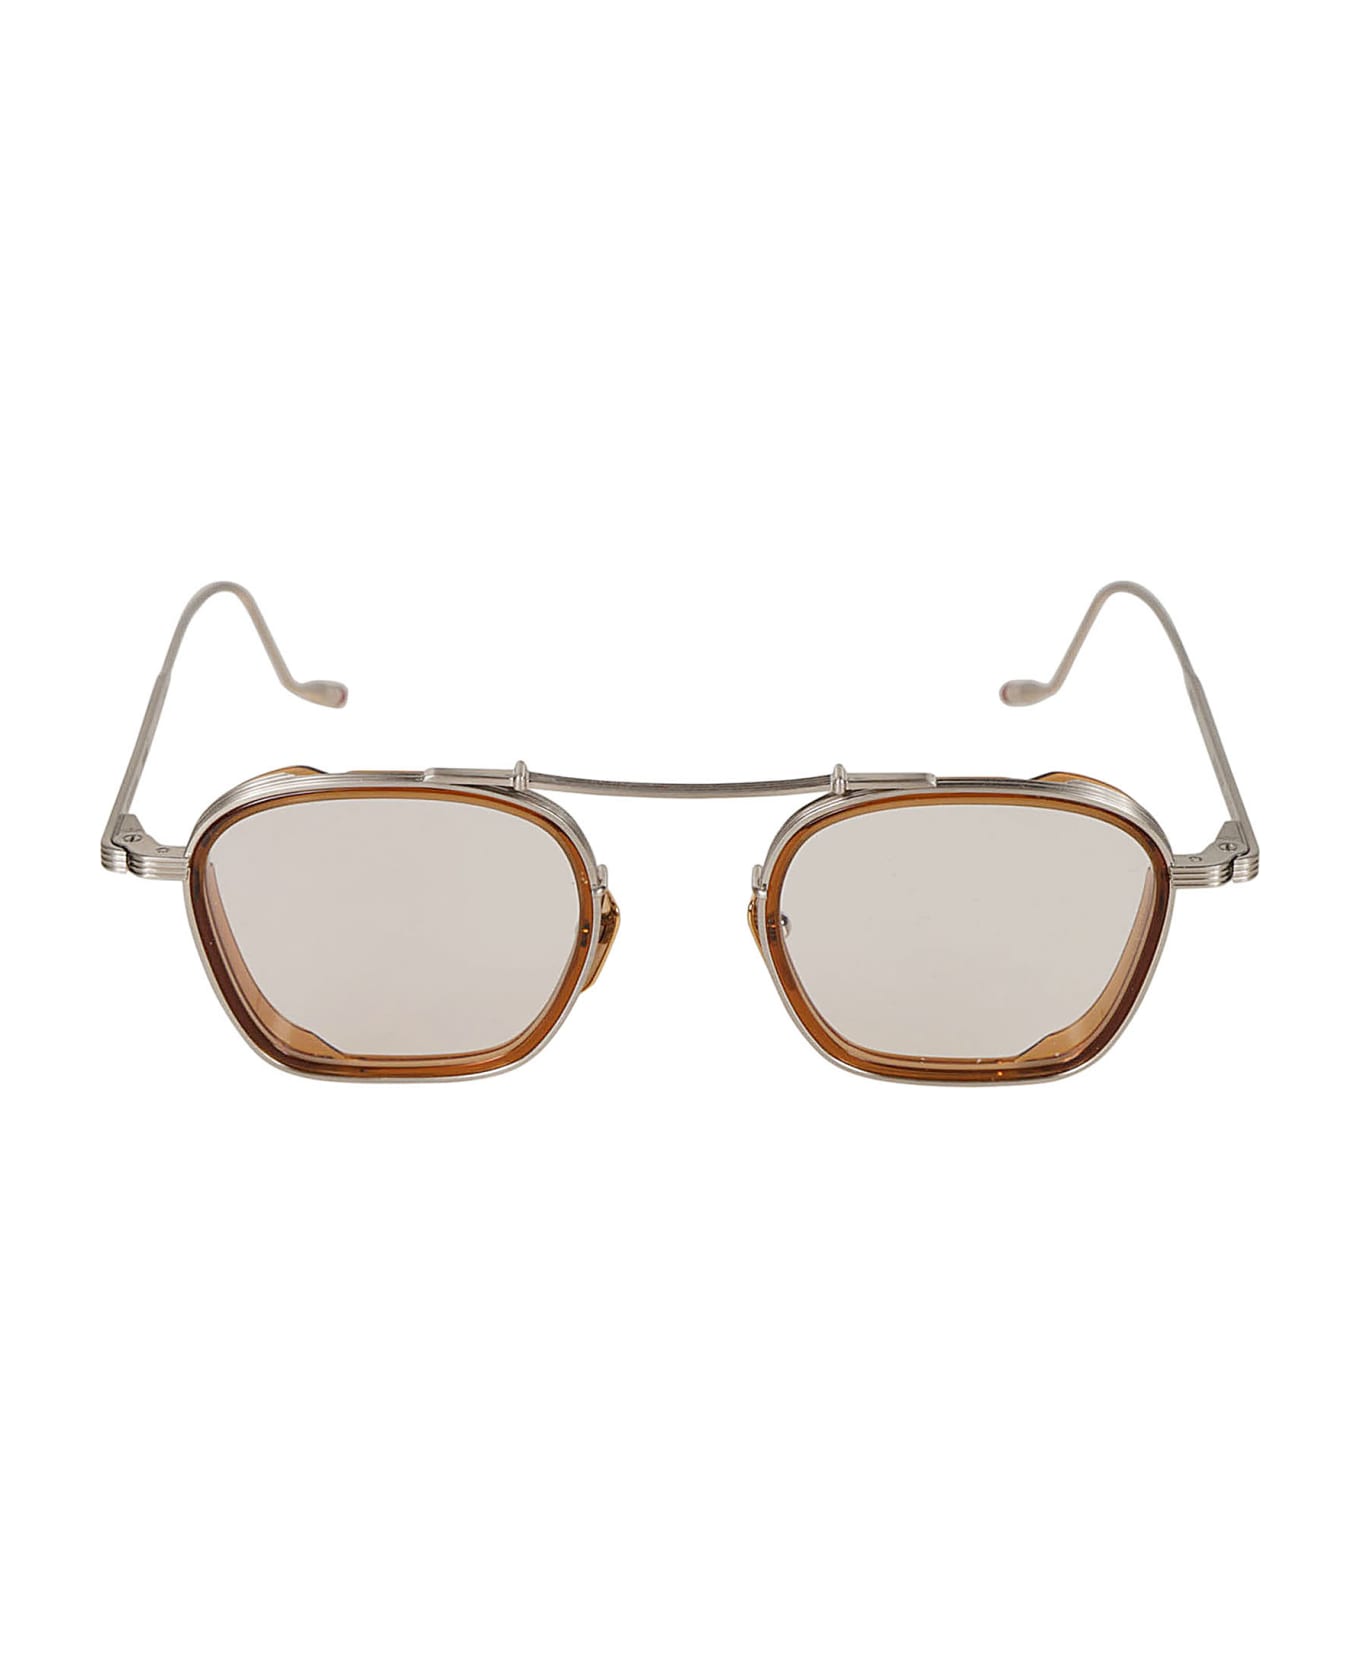 Jacques Marie Mage Baudelaire 2 Frame Glasses - Silver